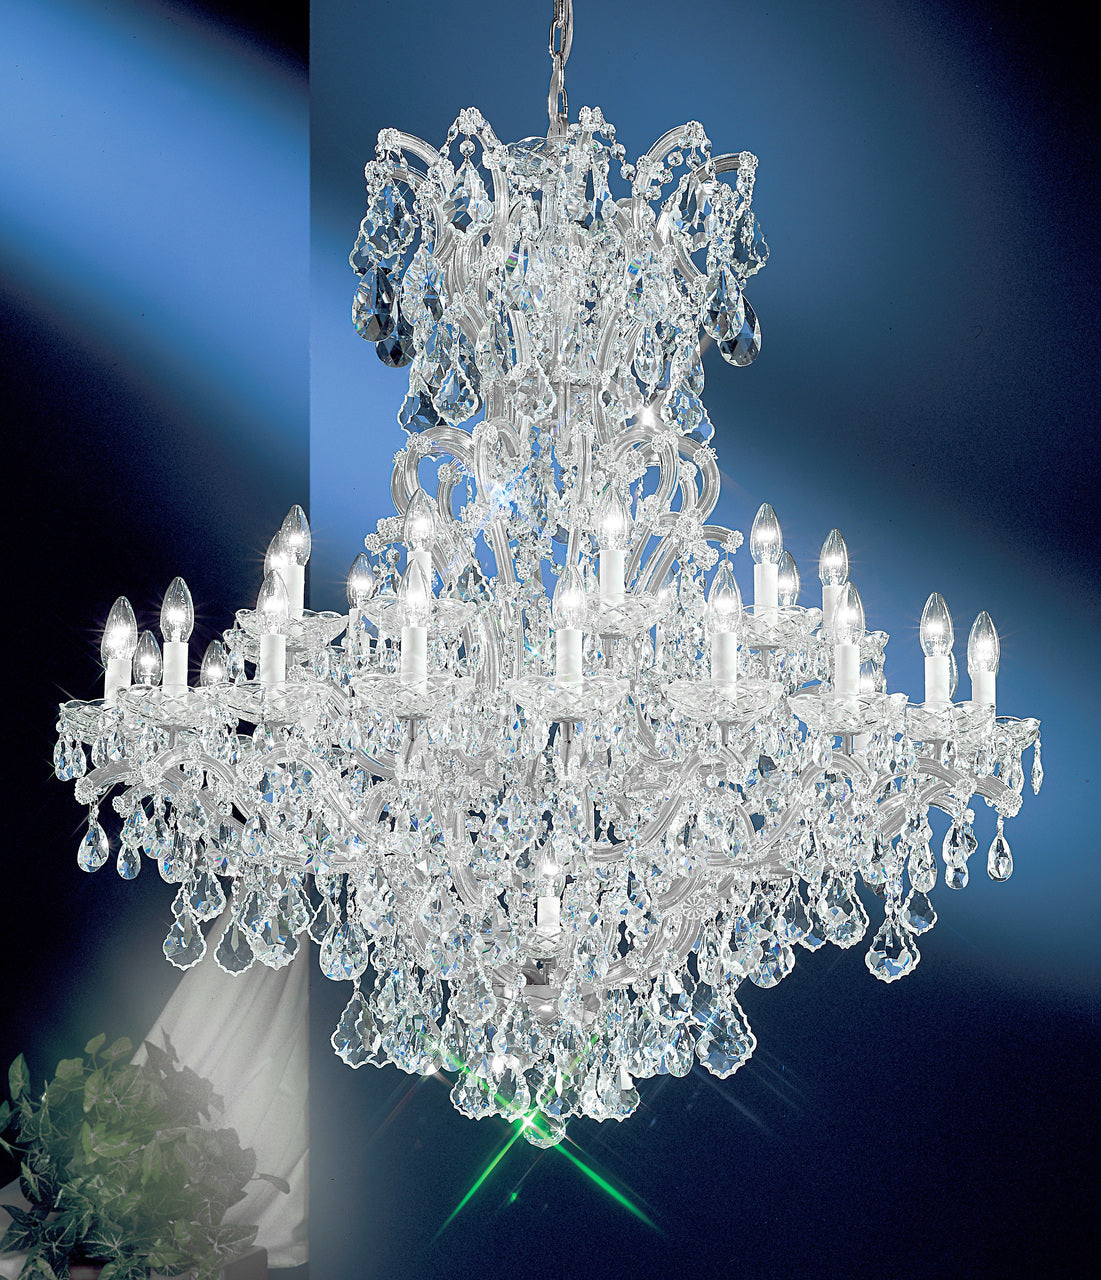 Classic Lighting 8163 CH C Maria Theresa Traditional Crystal Chandelier in Chrome (Imported from Italy)